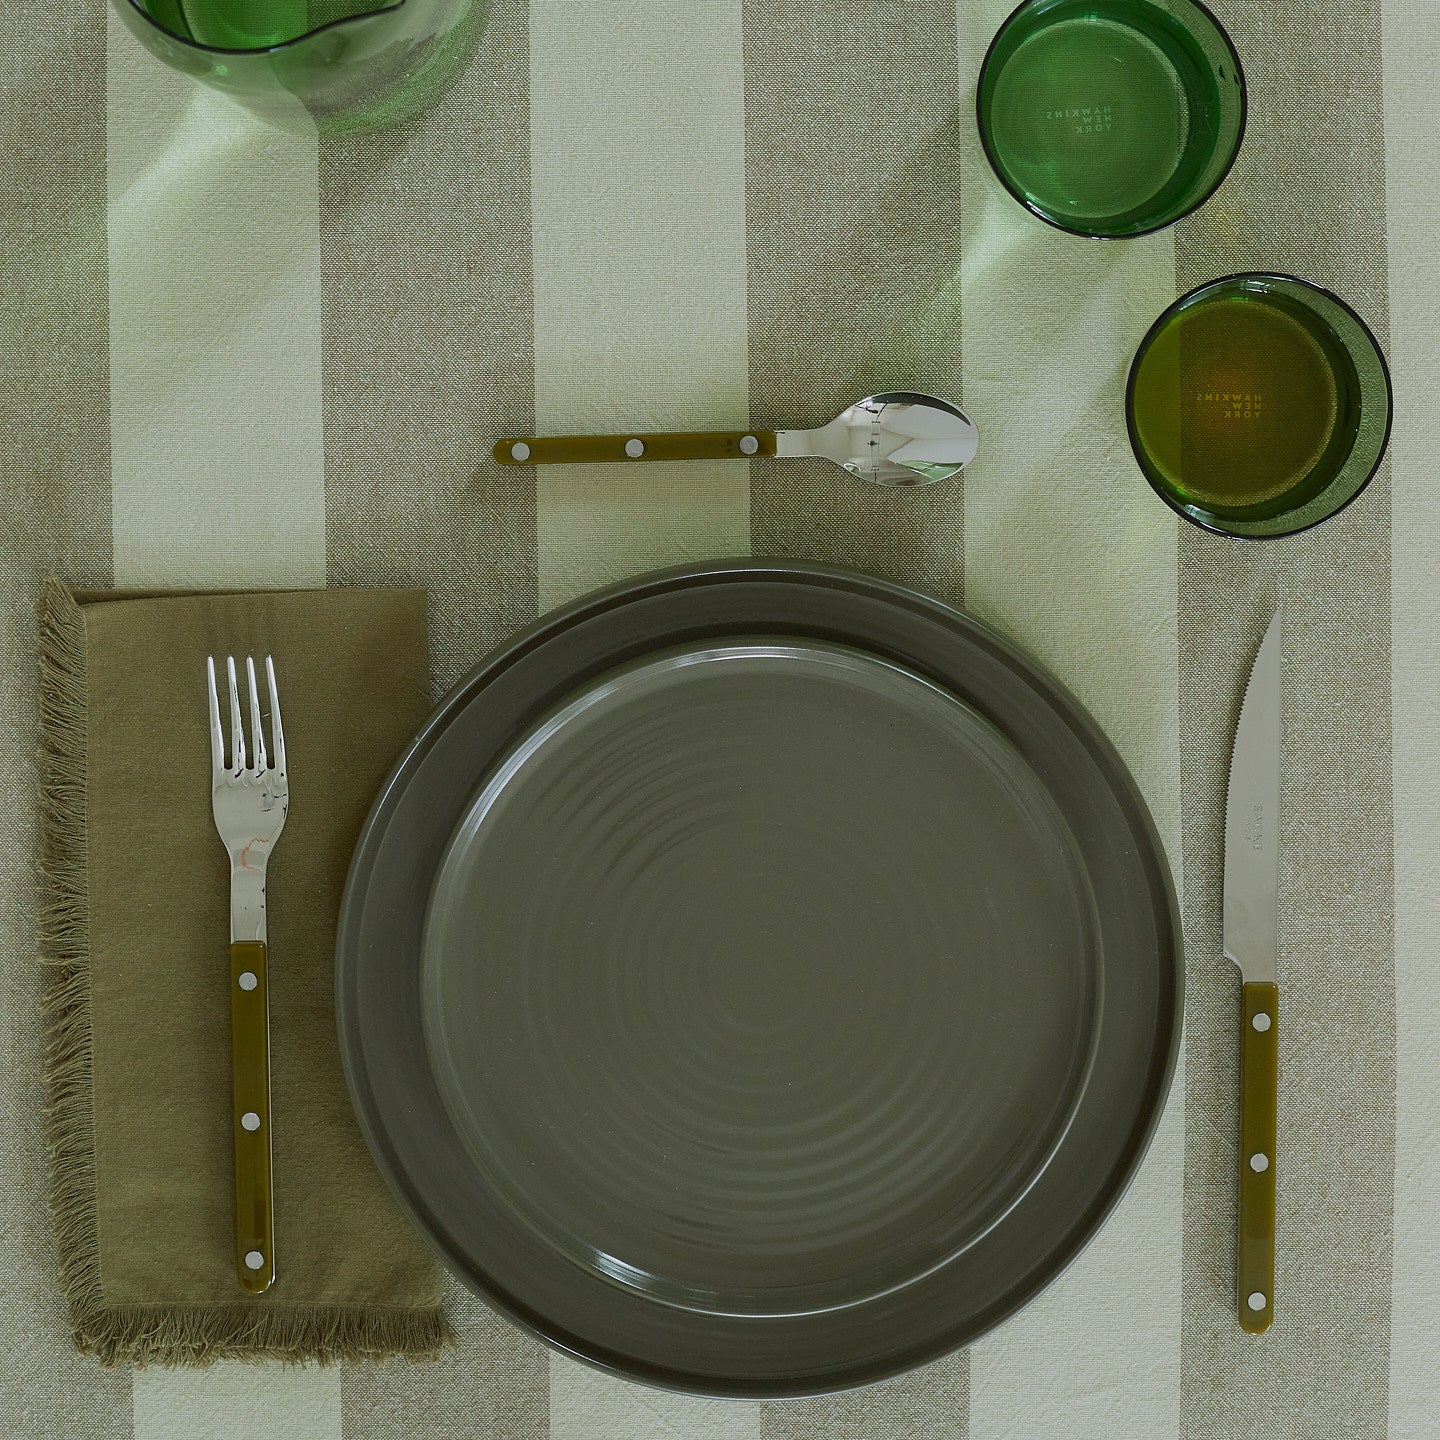 Placesetting with Essential Dinner Napkin in Olive on green striped tablecloth.